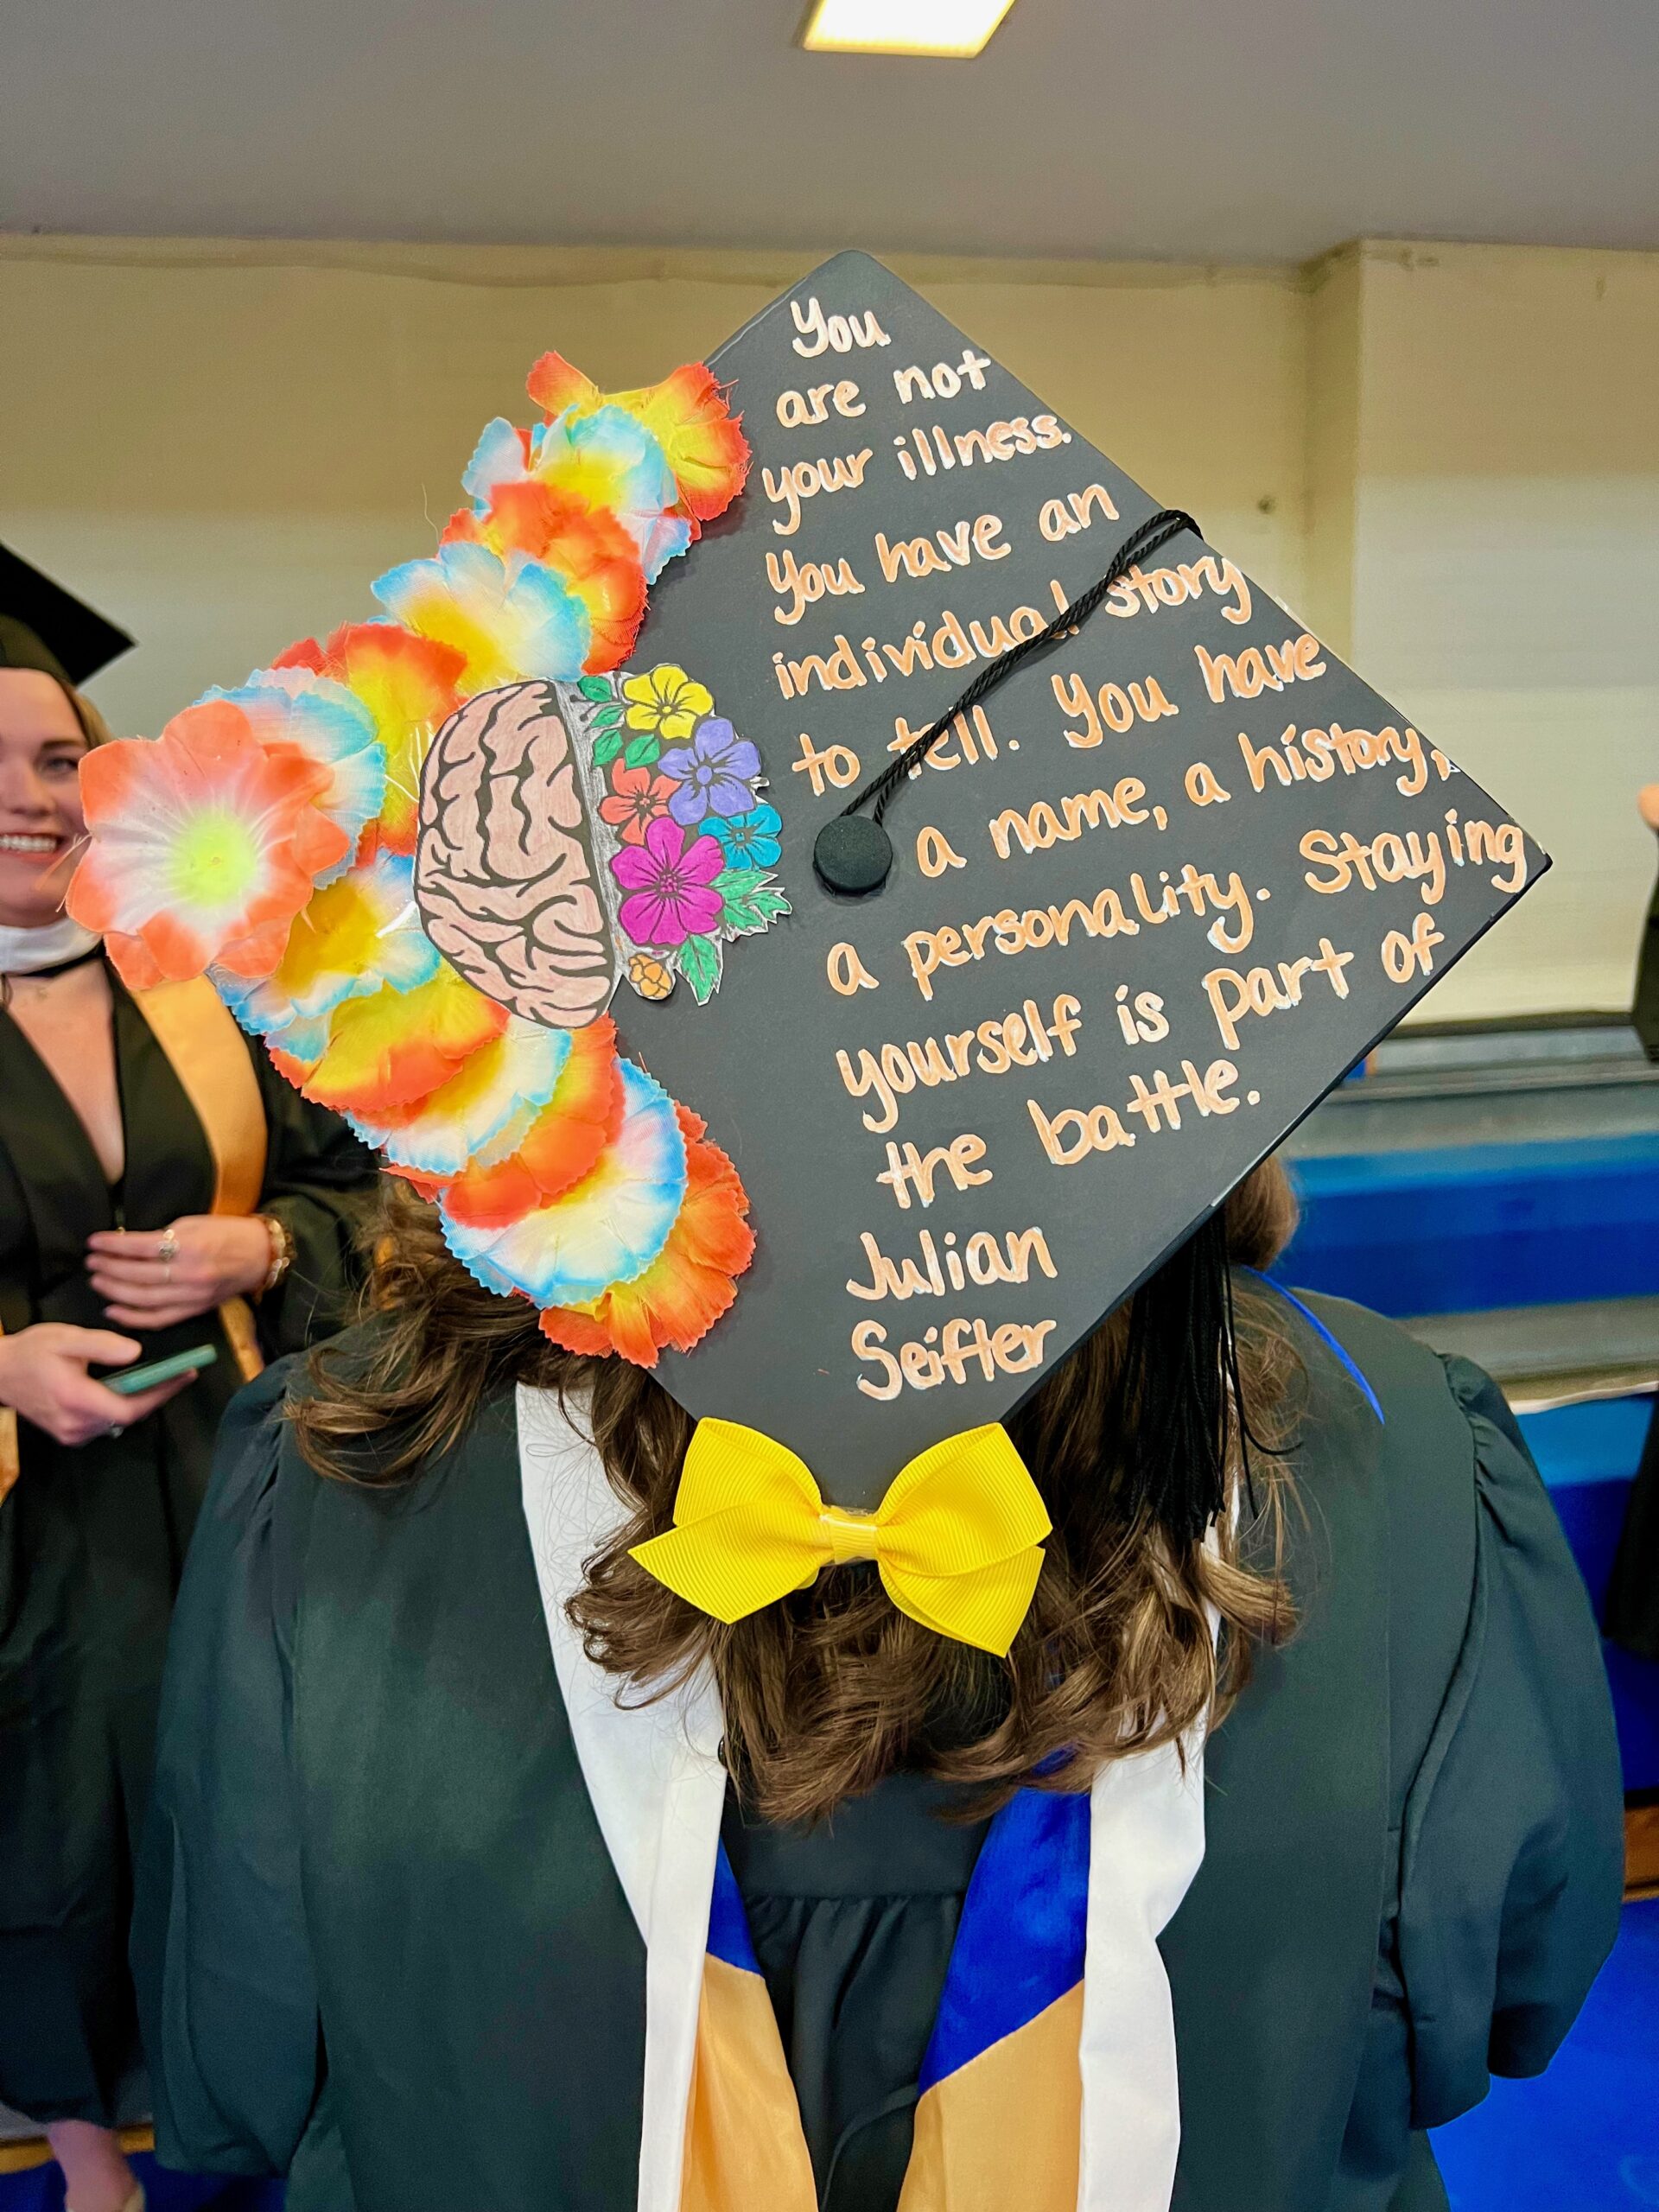 Decorated mortarboard reading "You are not your illness. You have and individual sotry to tell. You have a name, a history, a personality. Staying yourself is part of the battle. -Julian Seifler"